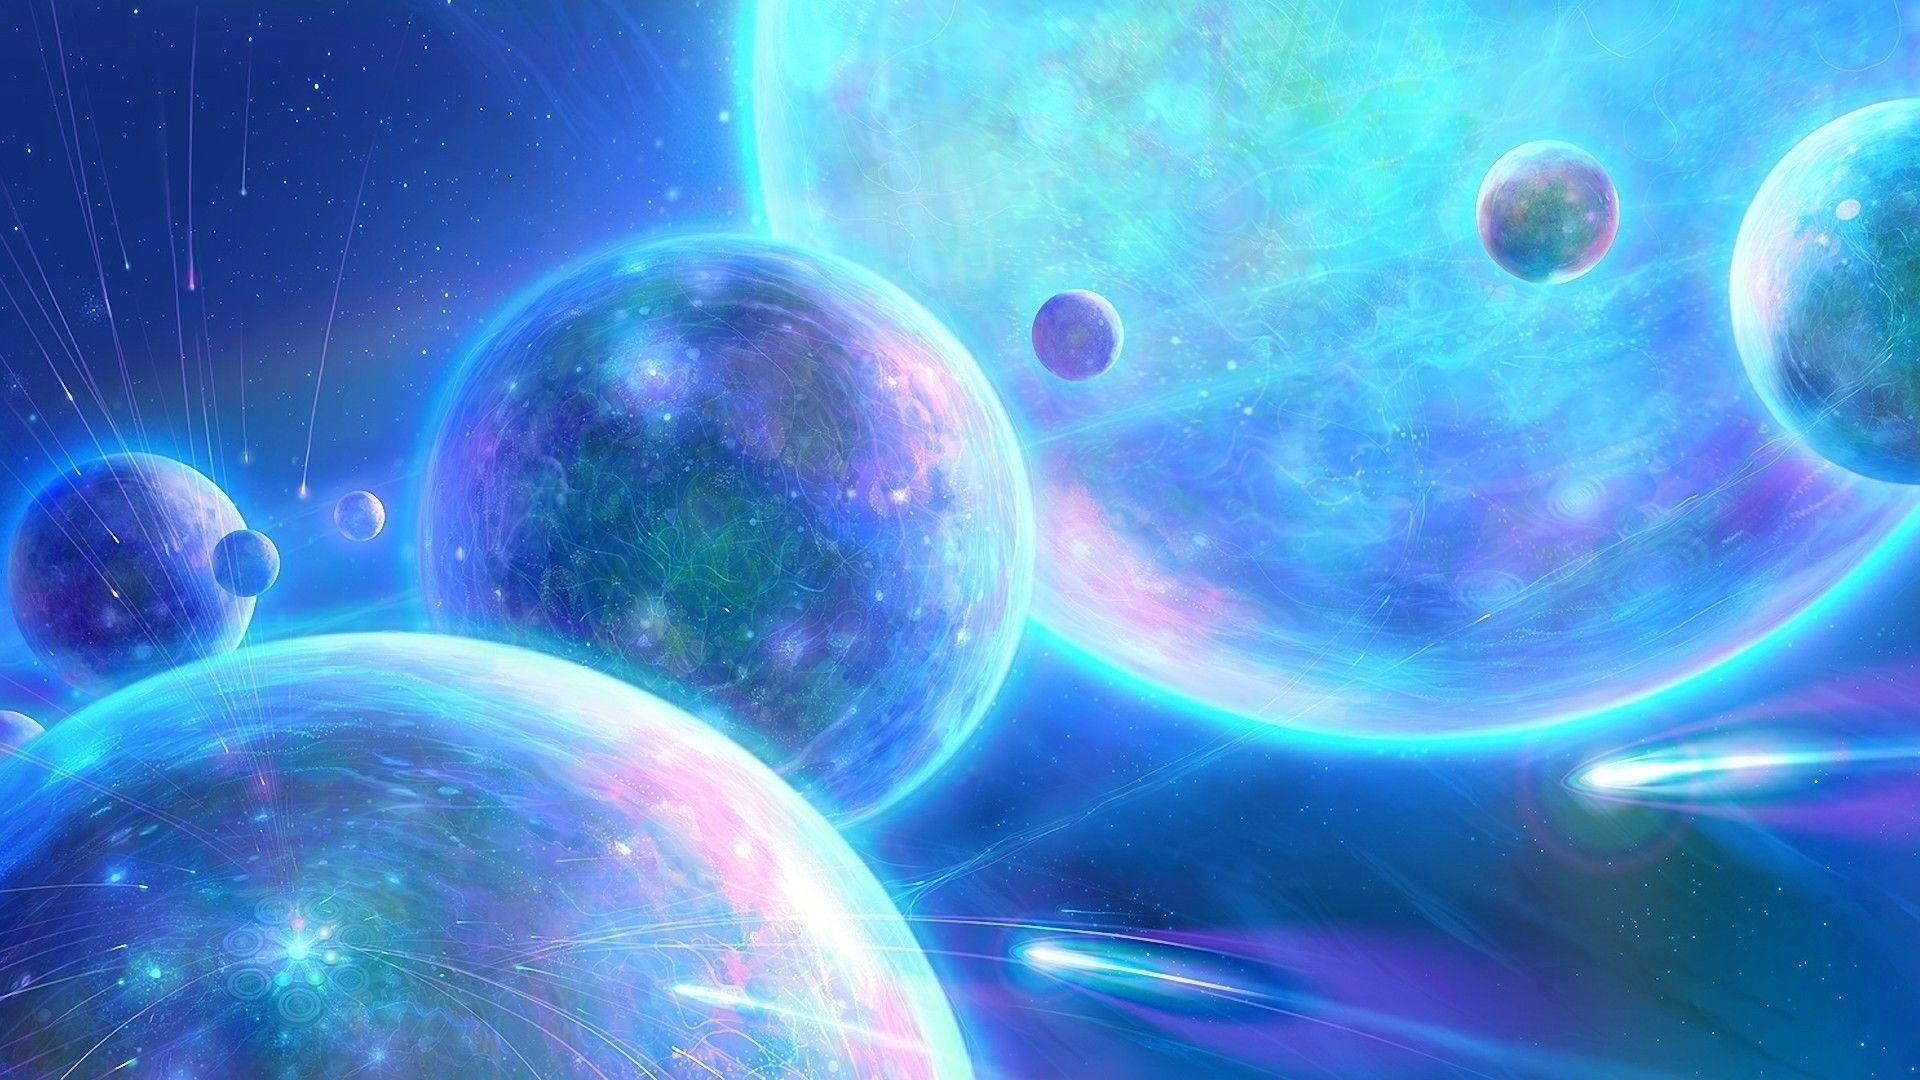 Abstract Kids Outer Space Wallpaper for Rooms 1920x1080PX